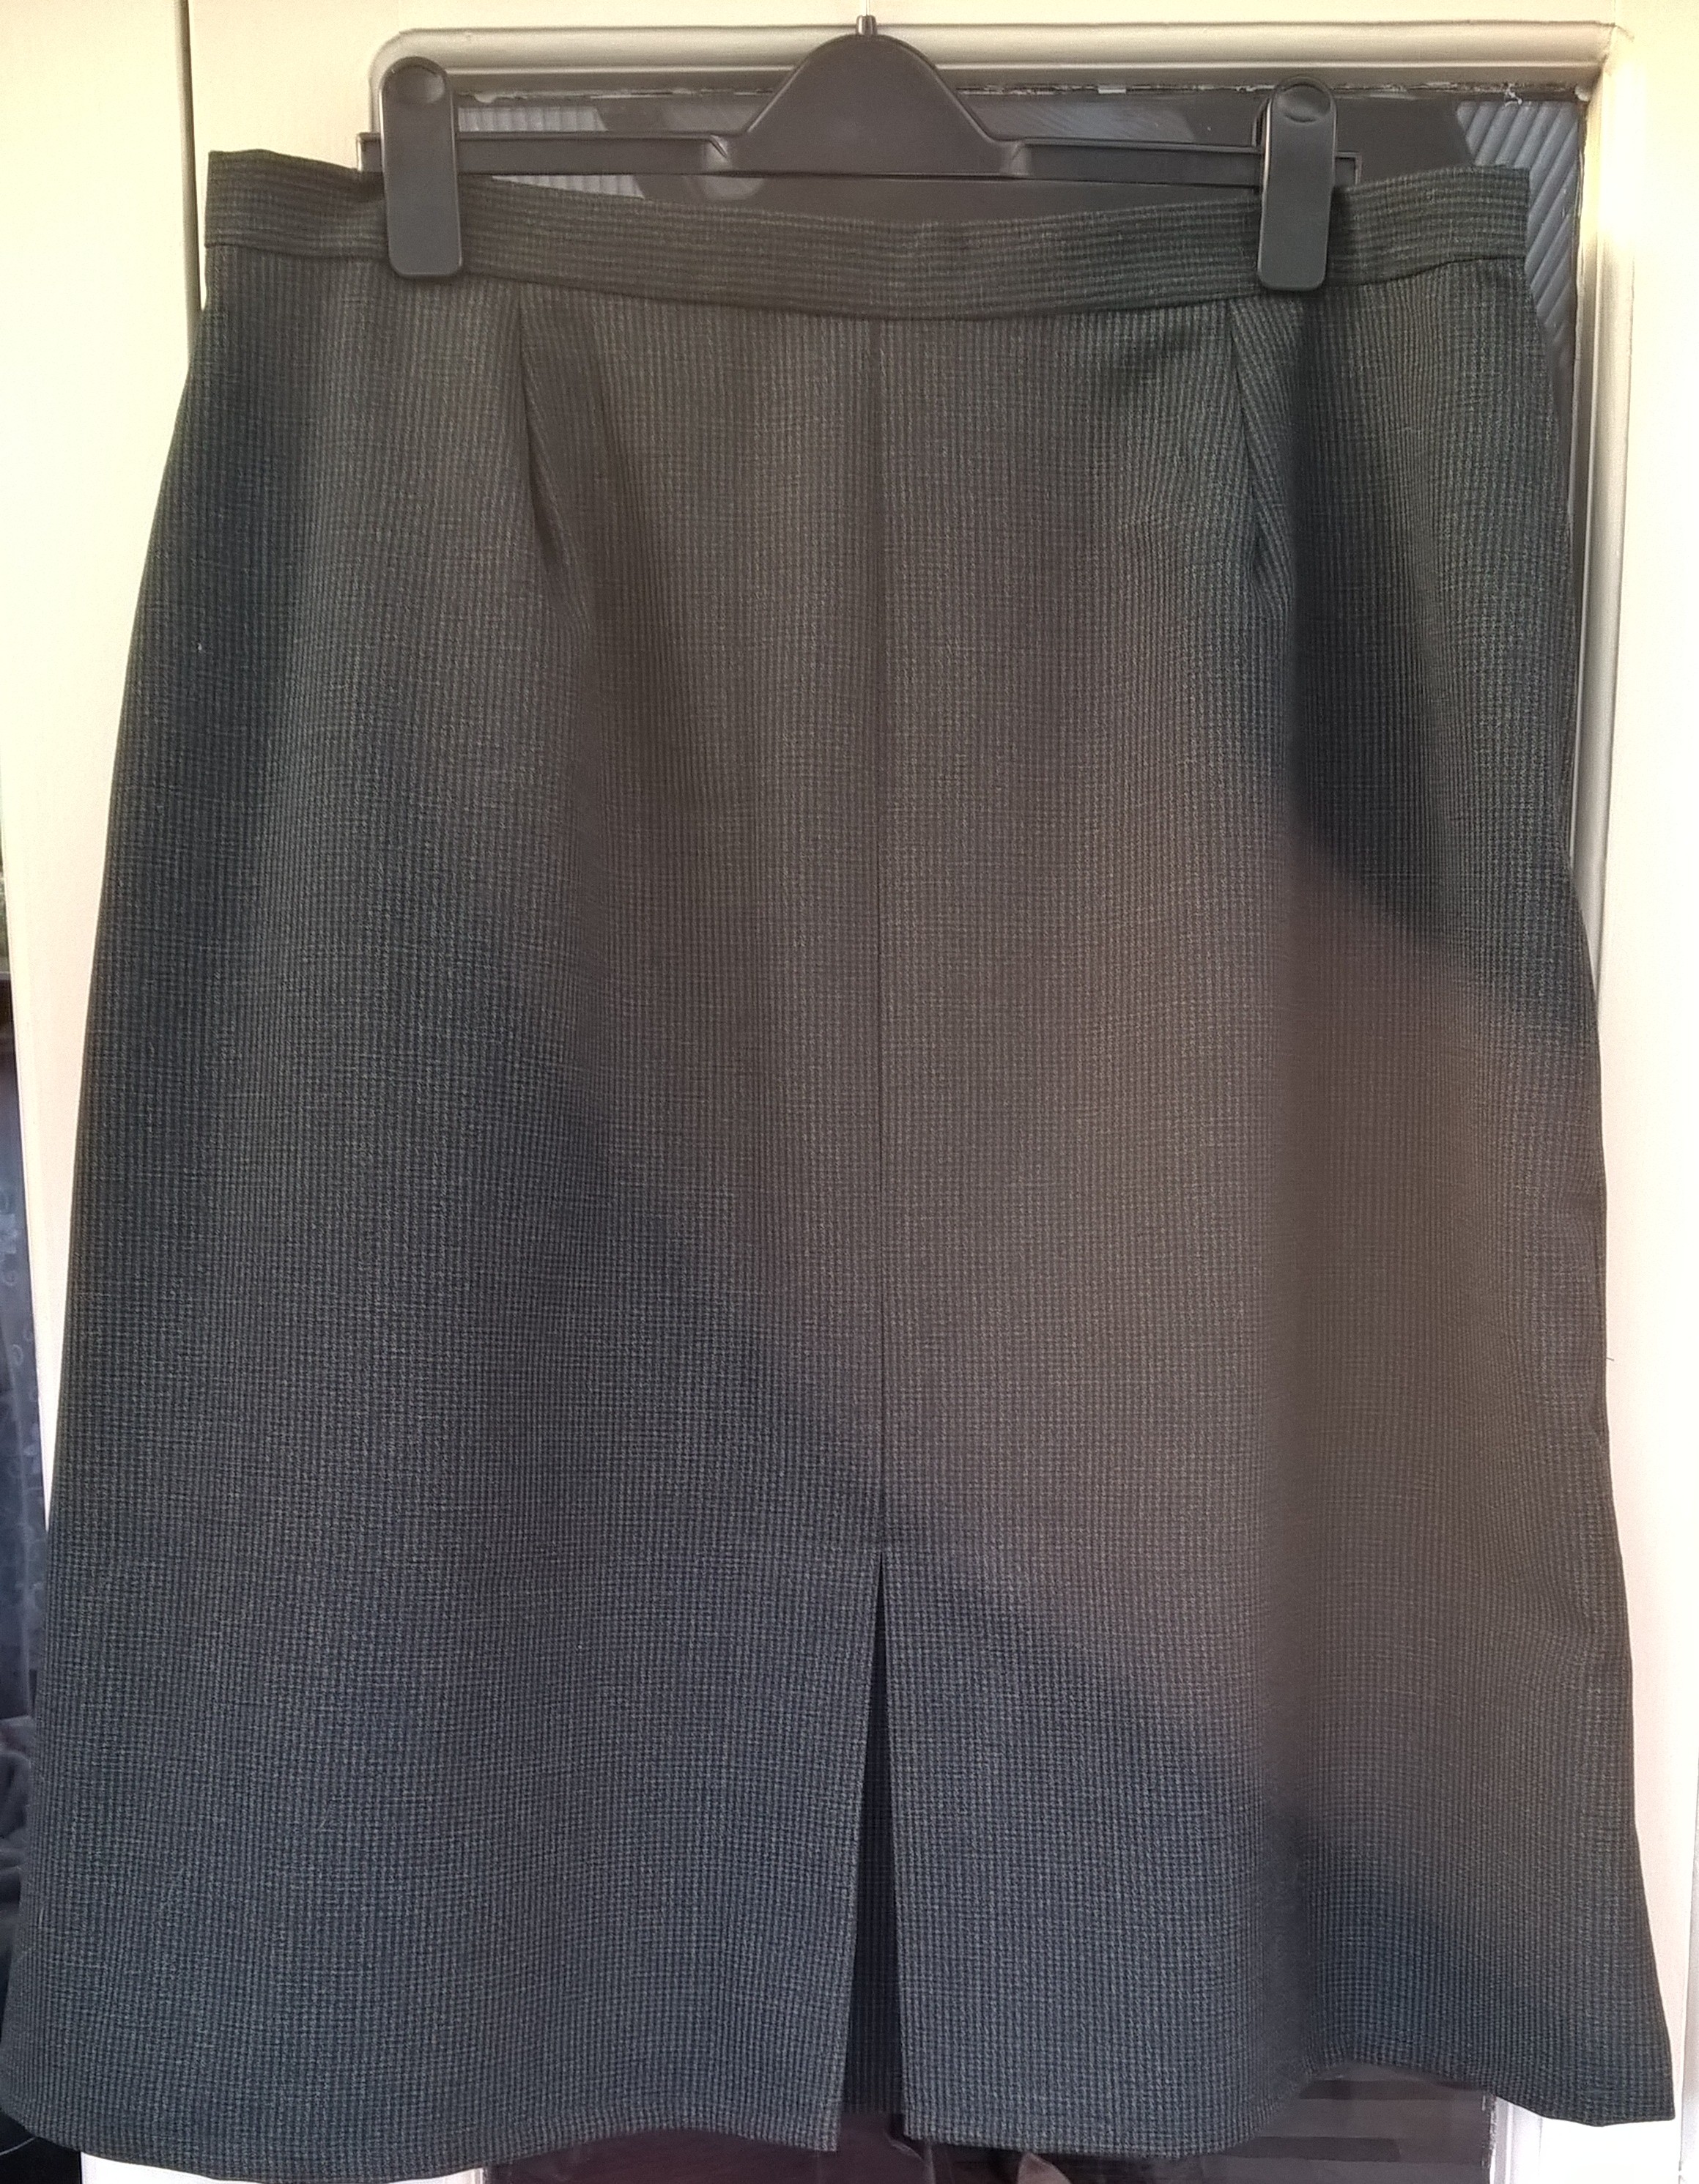 A made-to-measure skirt with front pleat